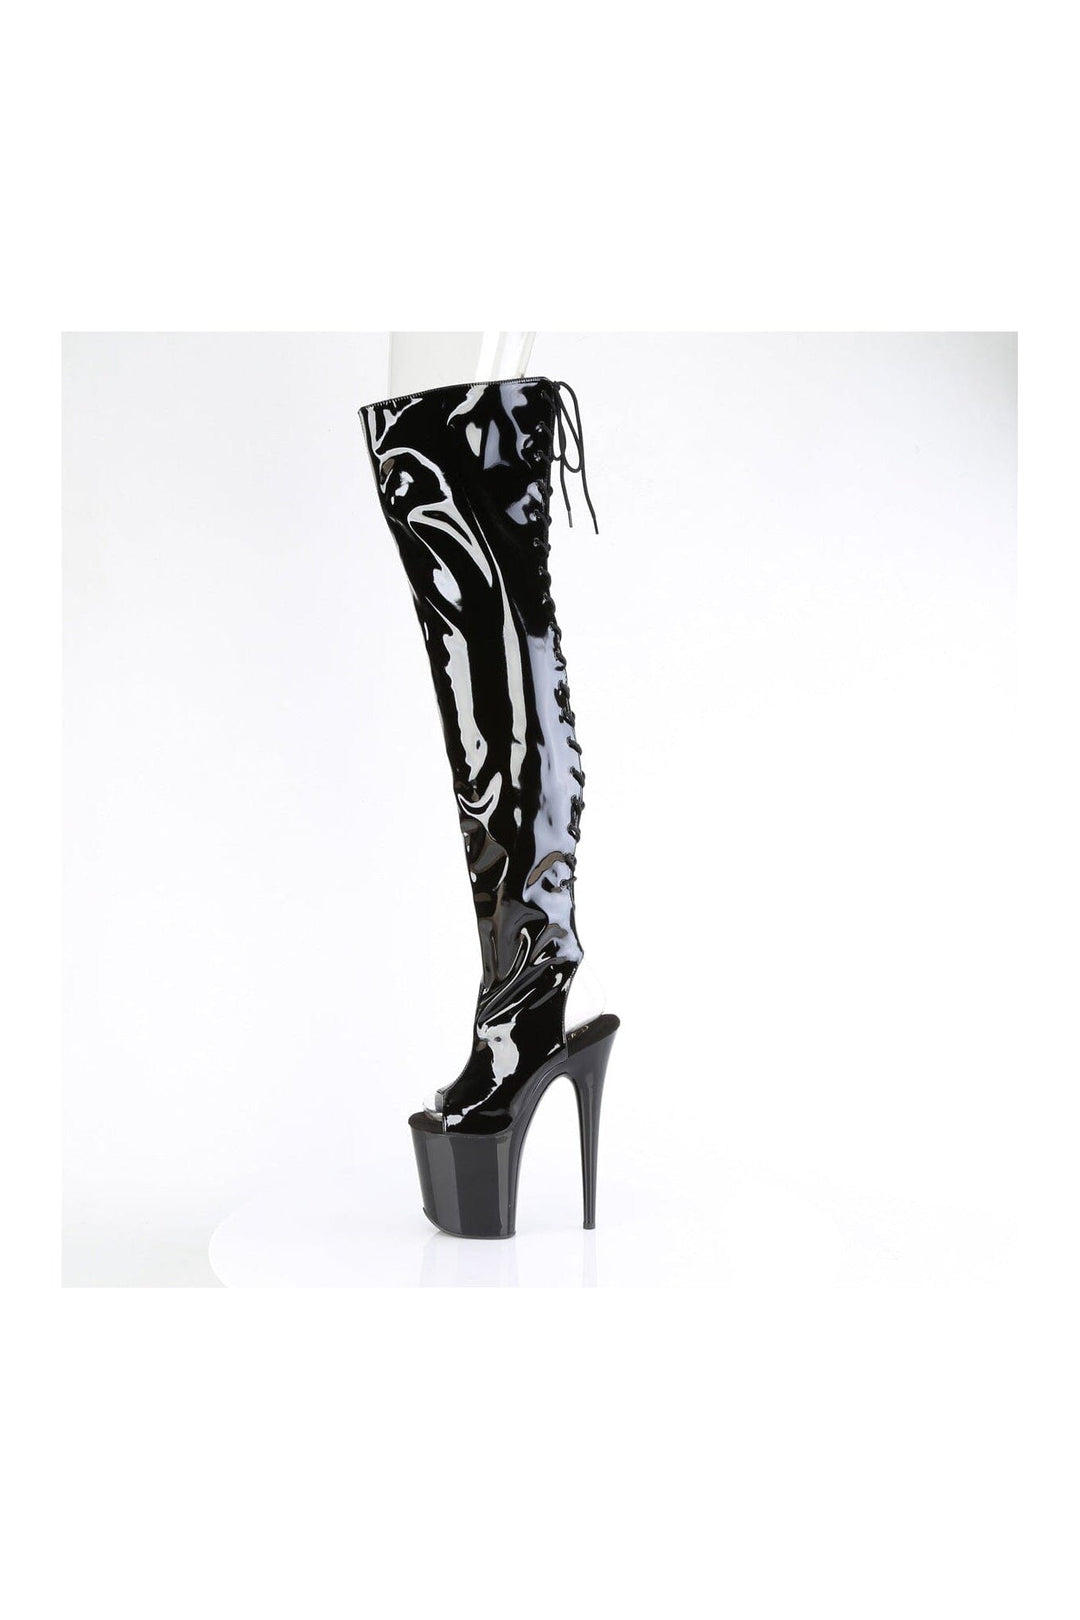 FLAMINGO-3017 Black Patent Thigh Boot-Thigh Boots-Pleaser-SEXYSHOES.COM